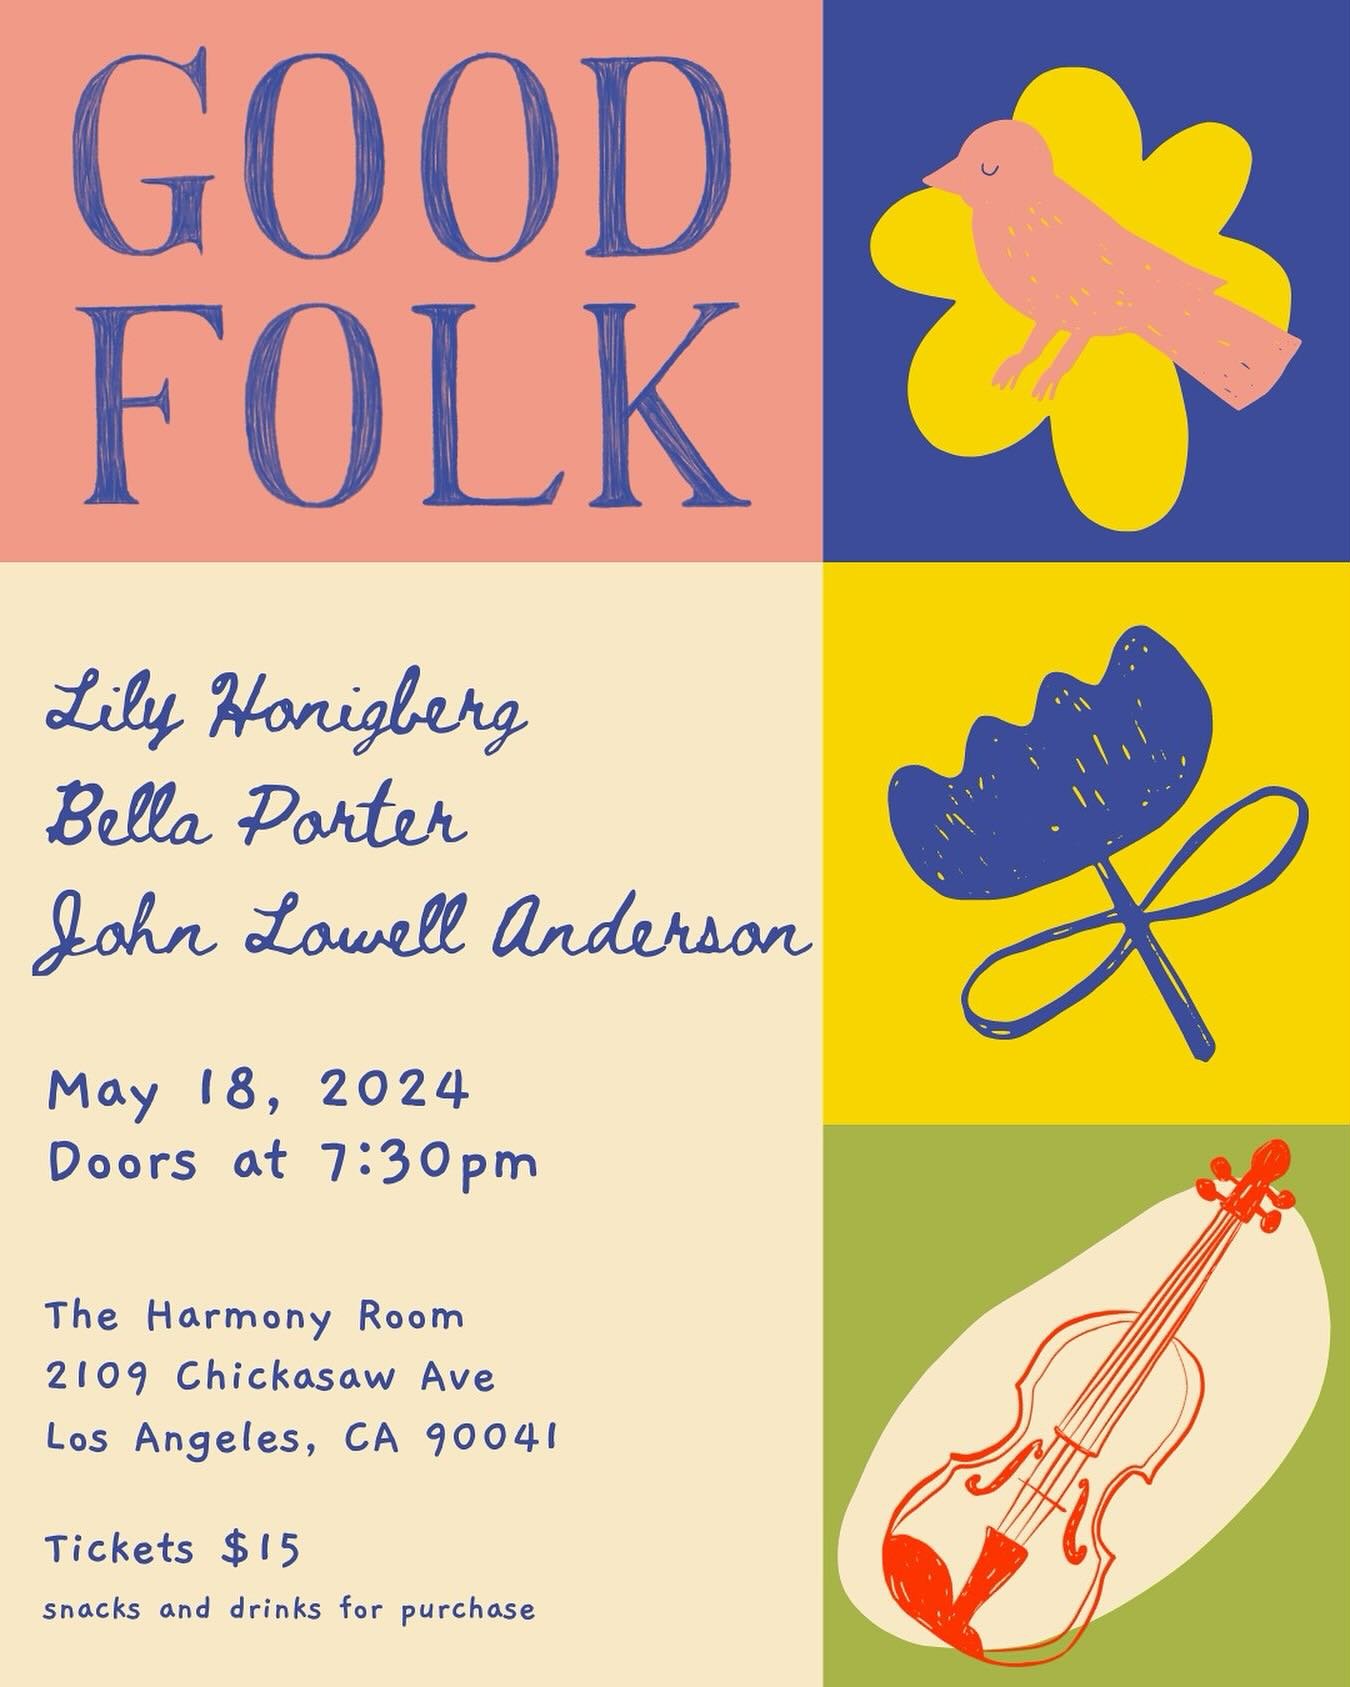 Another show is coming up! Put May 18th in your calendar with @johnlowellanderson @bellaporter and @lilybelknap at @harmonyroomla! Go to the link in our bio for tickets!
.
.
.
.
.
#folkmusic #goodfolk #losangelesfolkmusic #singersongwriter #folksinge